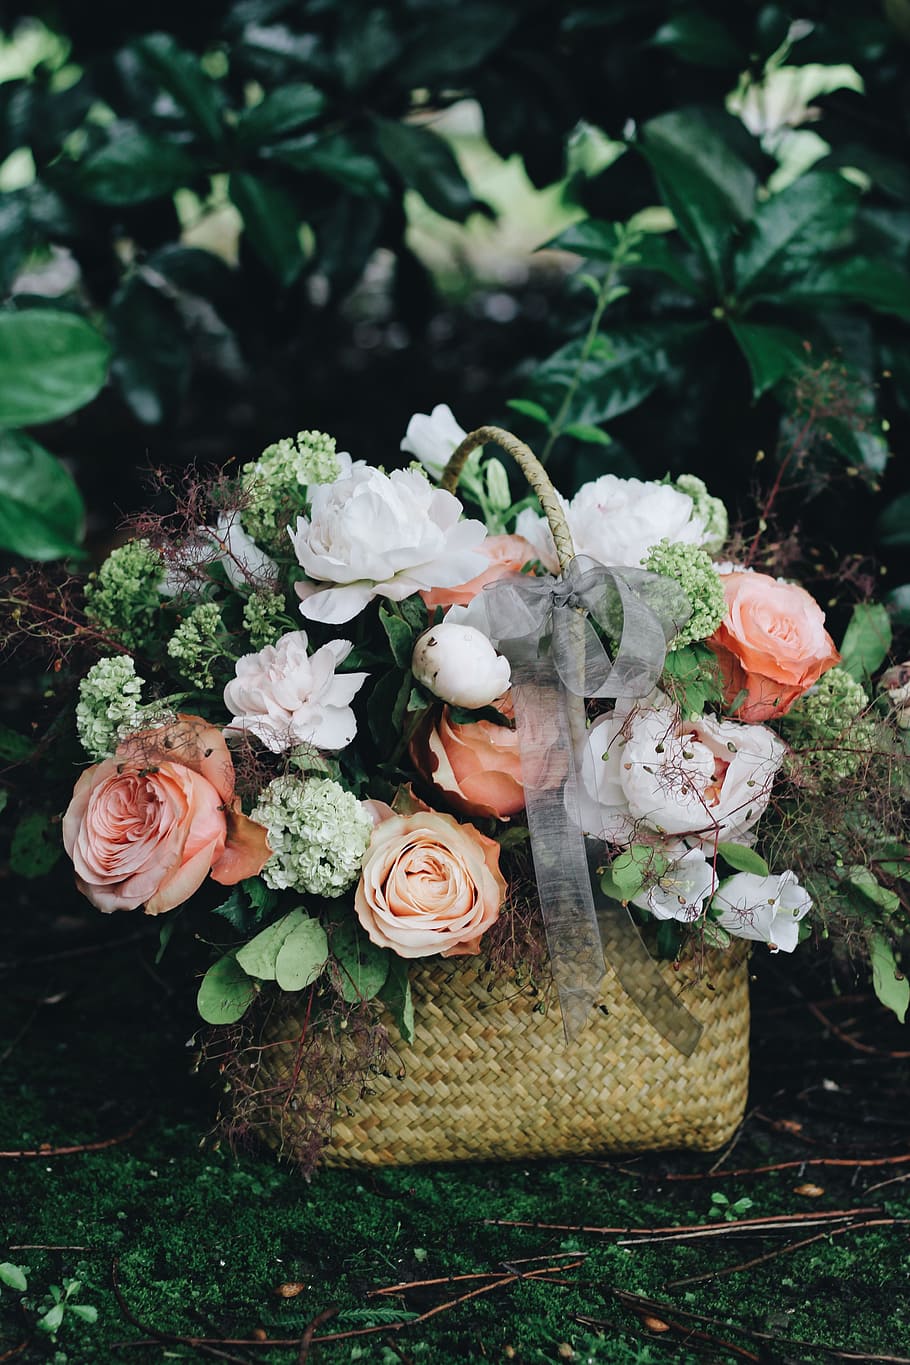 bouquet of white and pink flowers in basket, green, white, and pink petaled flowers in brown wicker basket